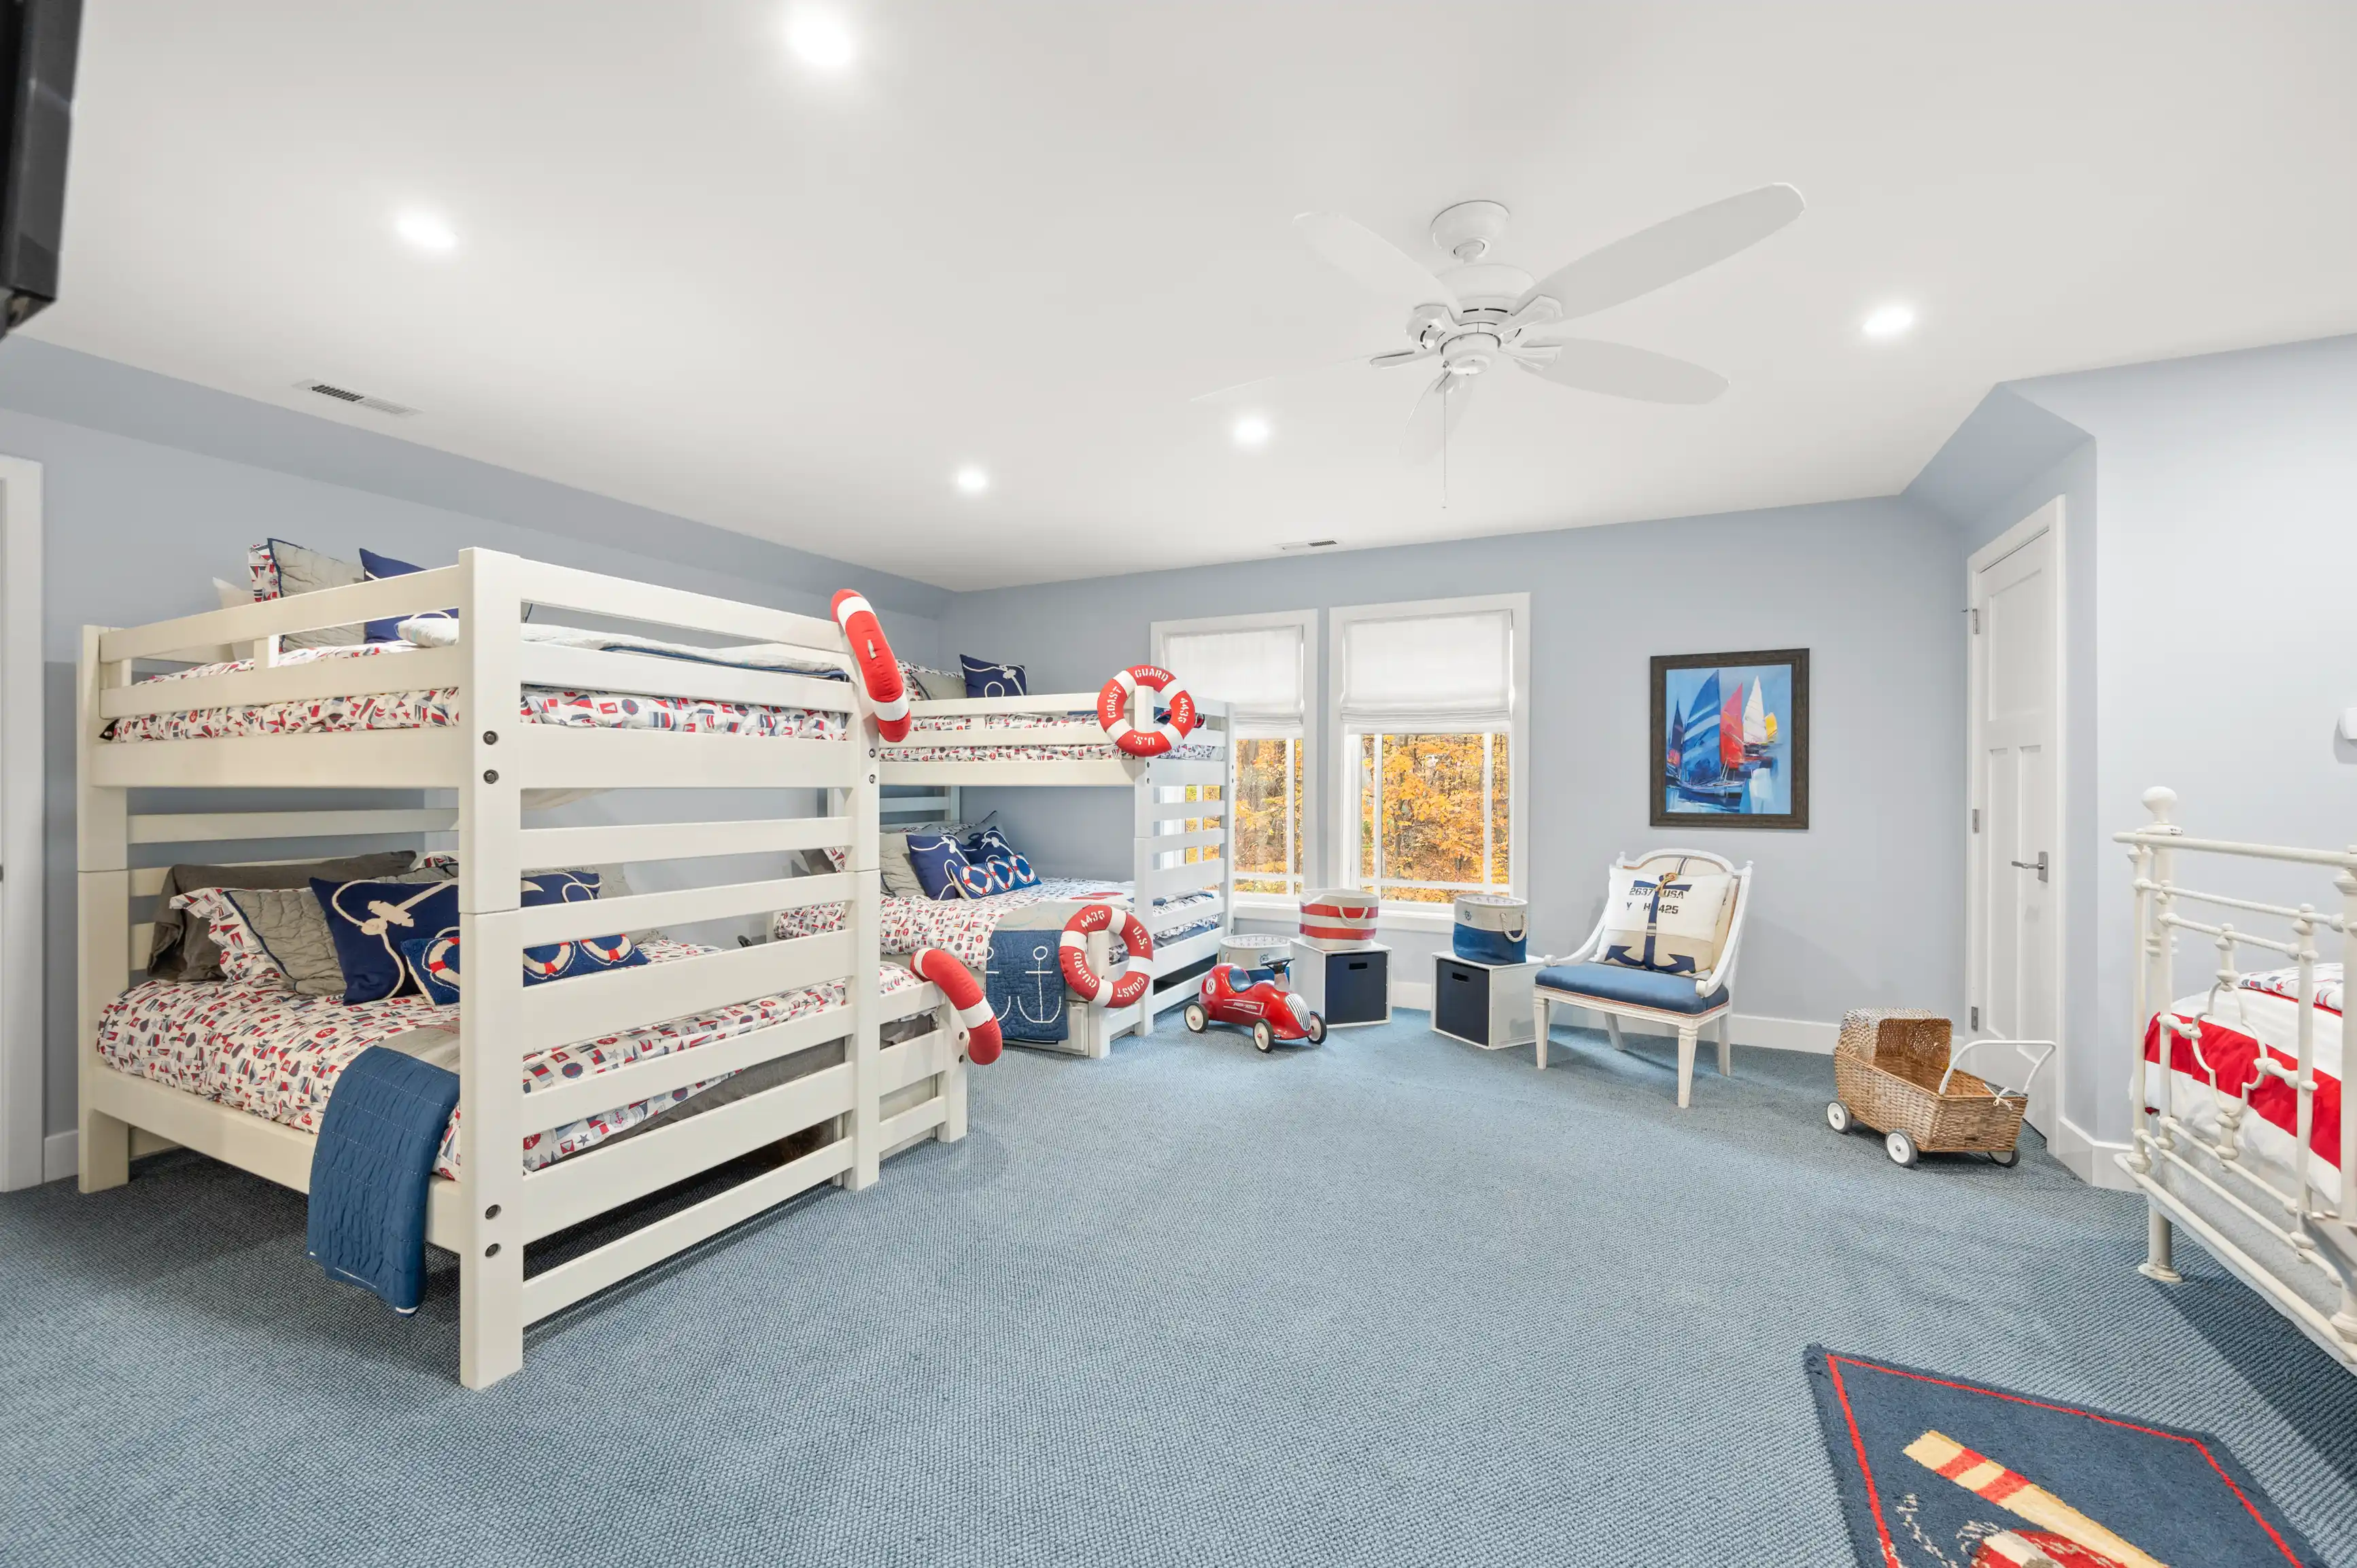 Spacious children's room with nautical theme, featuring a bunk bed with sailboat bedding, lifebuoy decorations, toy chest, and a wall with framed sailboat art.